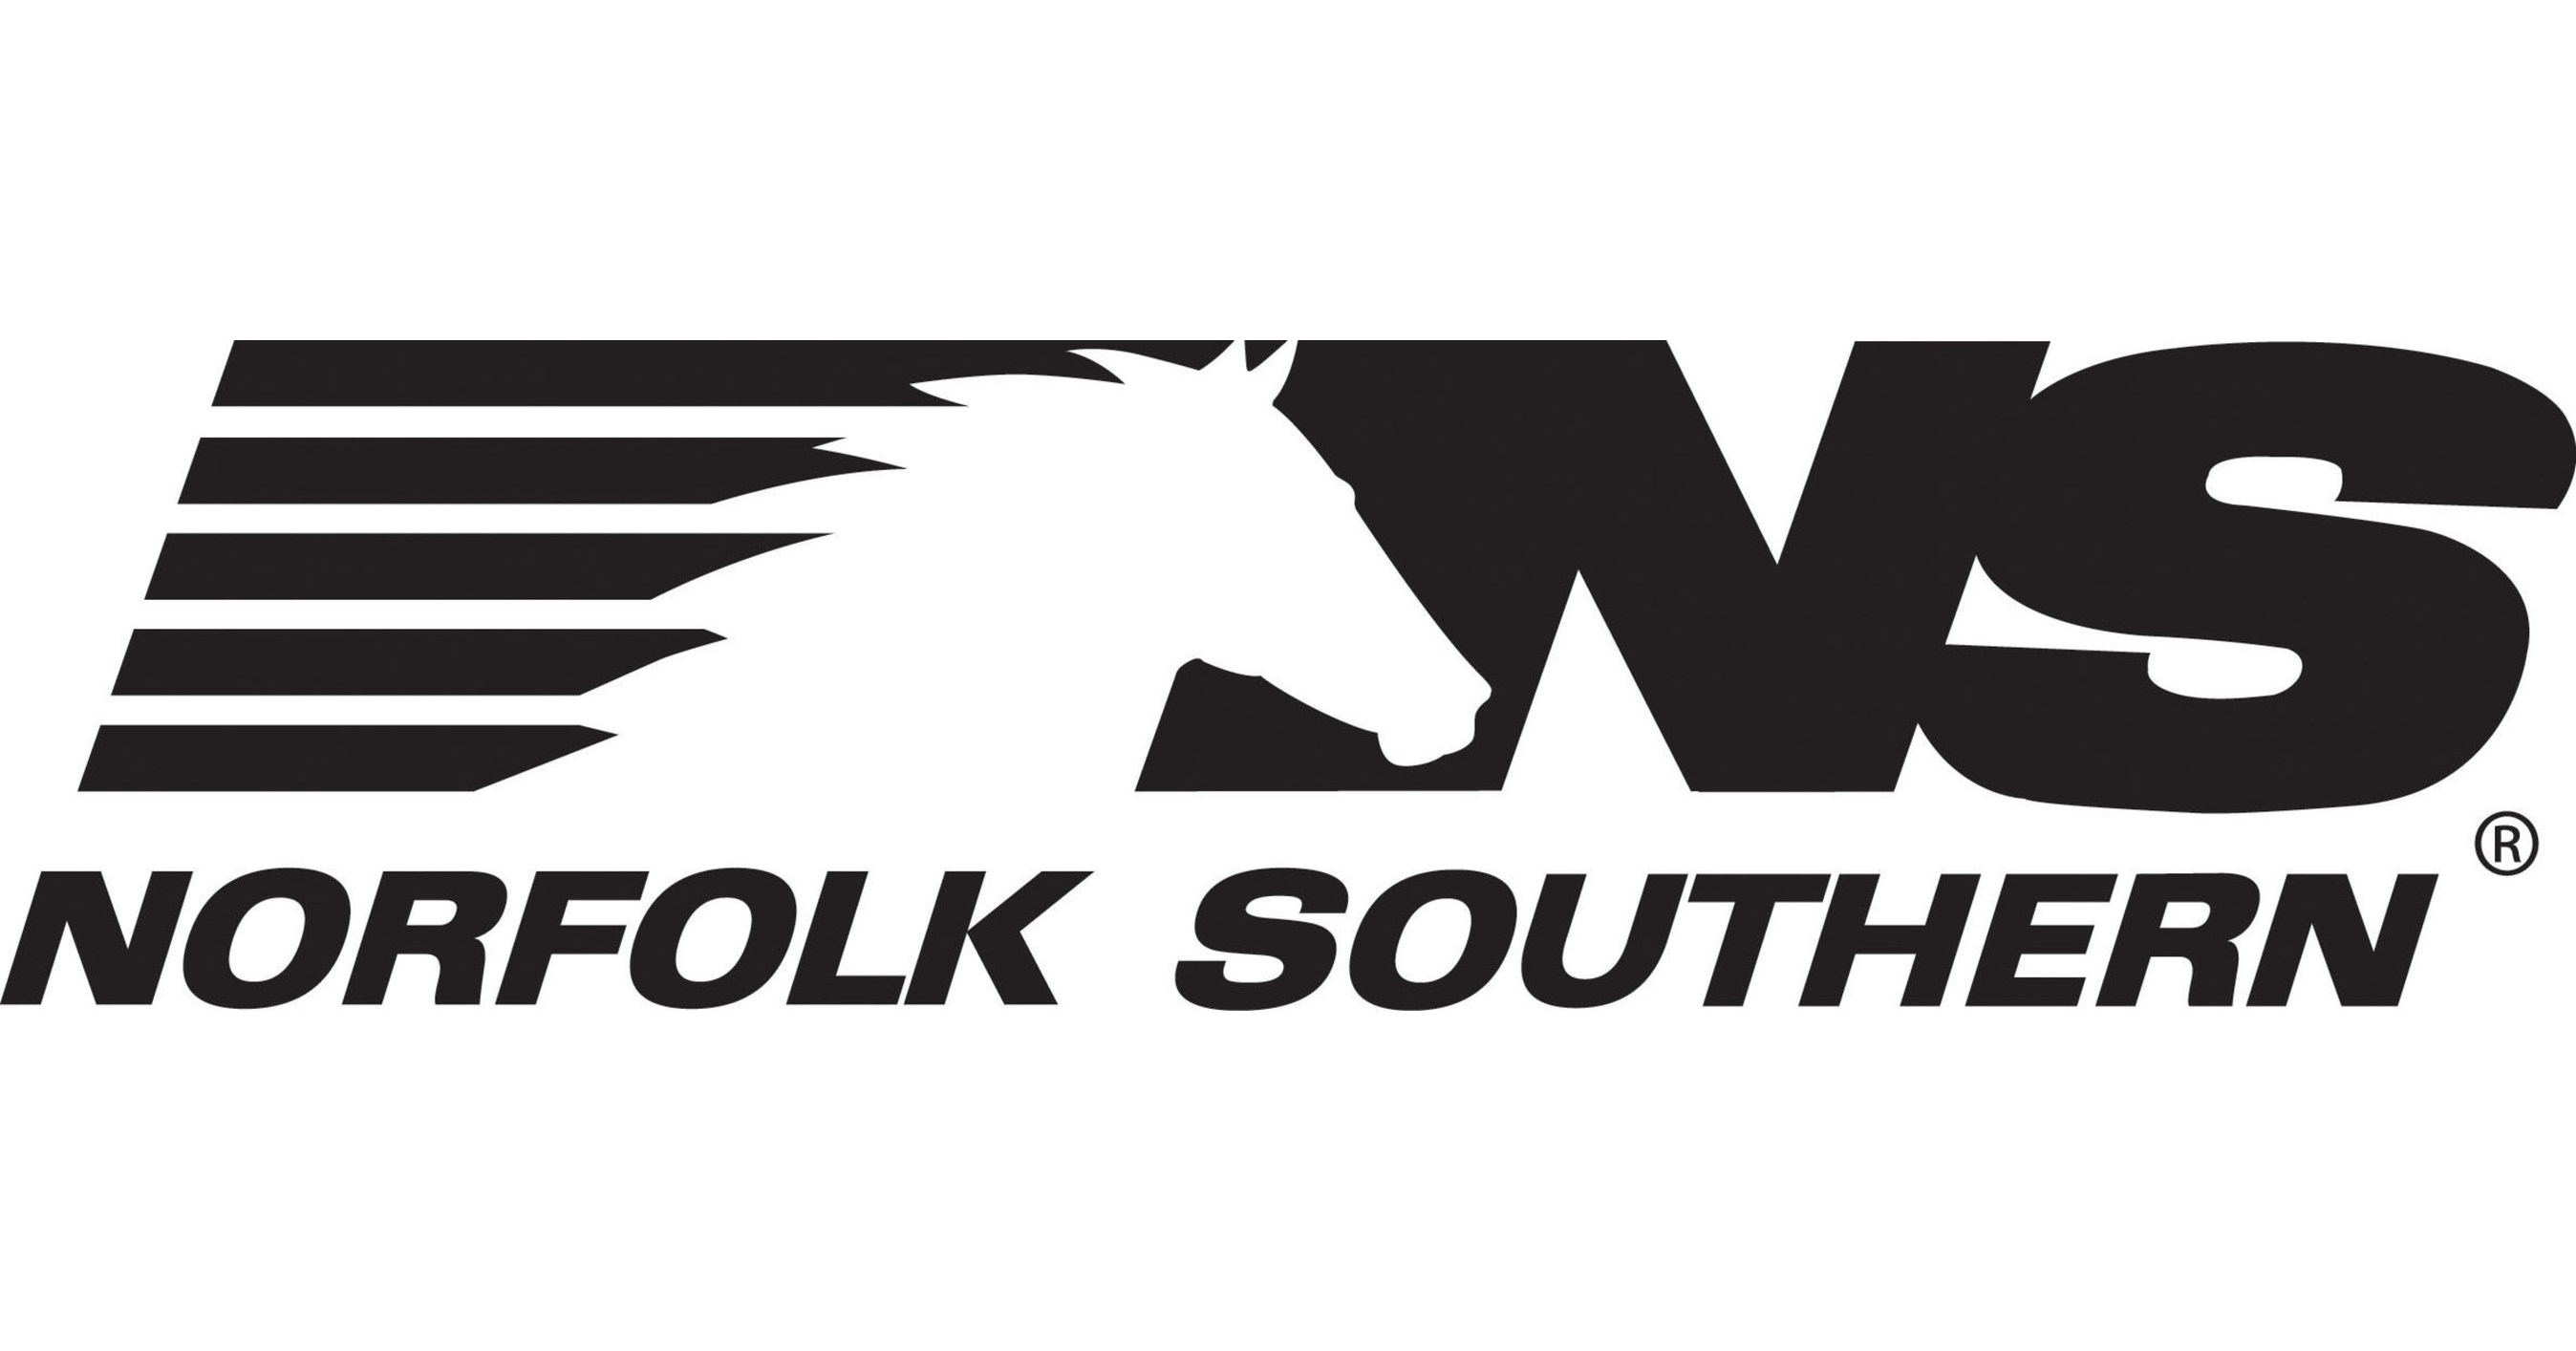  Norfolk Southern offering conductor starting bonuses of $5,000 in three new locations 